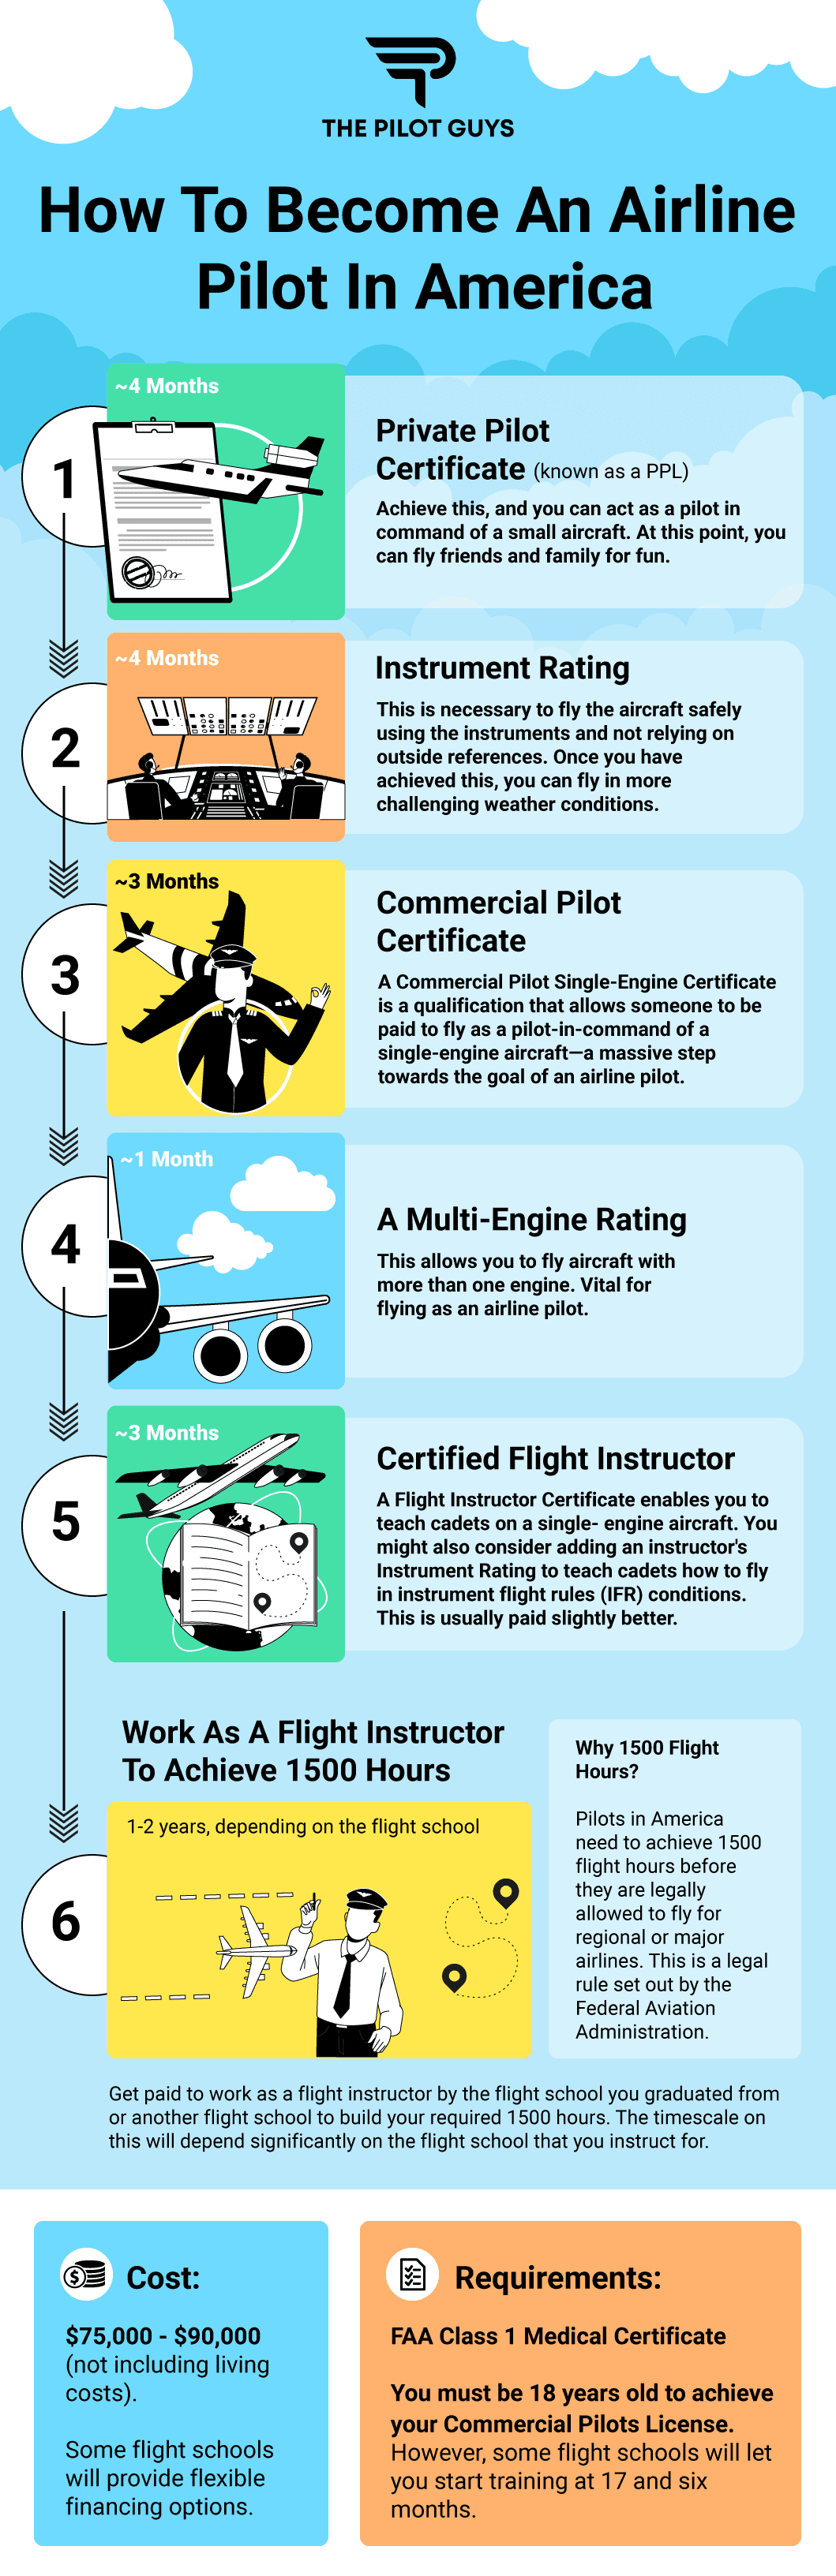 An infographic explaining how long it takes to become an airline pilot, including: - Getting a PPL (~4 months). - Getting An Instrument Rating (~4 months) - Getting A Commercial Pilot Certificate (~3 months) - Getting a Multi-Engine Rating (~1 month) - Becoming a Certified Flight Instructor (~3 months) - Working as a flight instructor to achieve 1500 hours (1-2 years). Also helping explain how much does it cost to become a pilot.